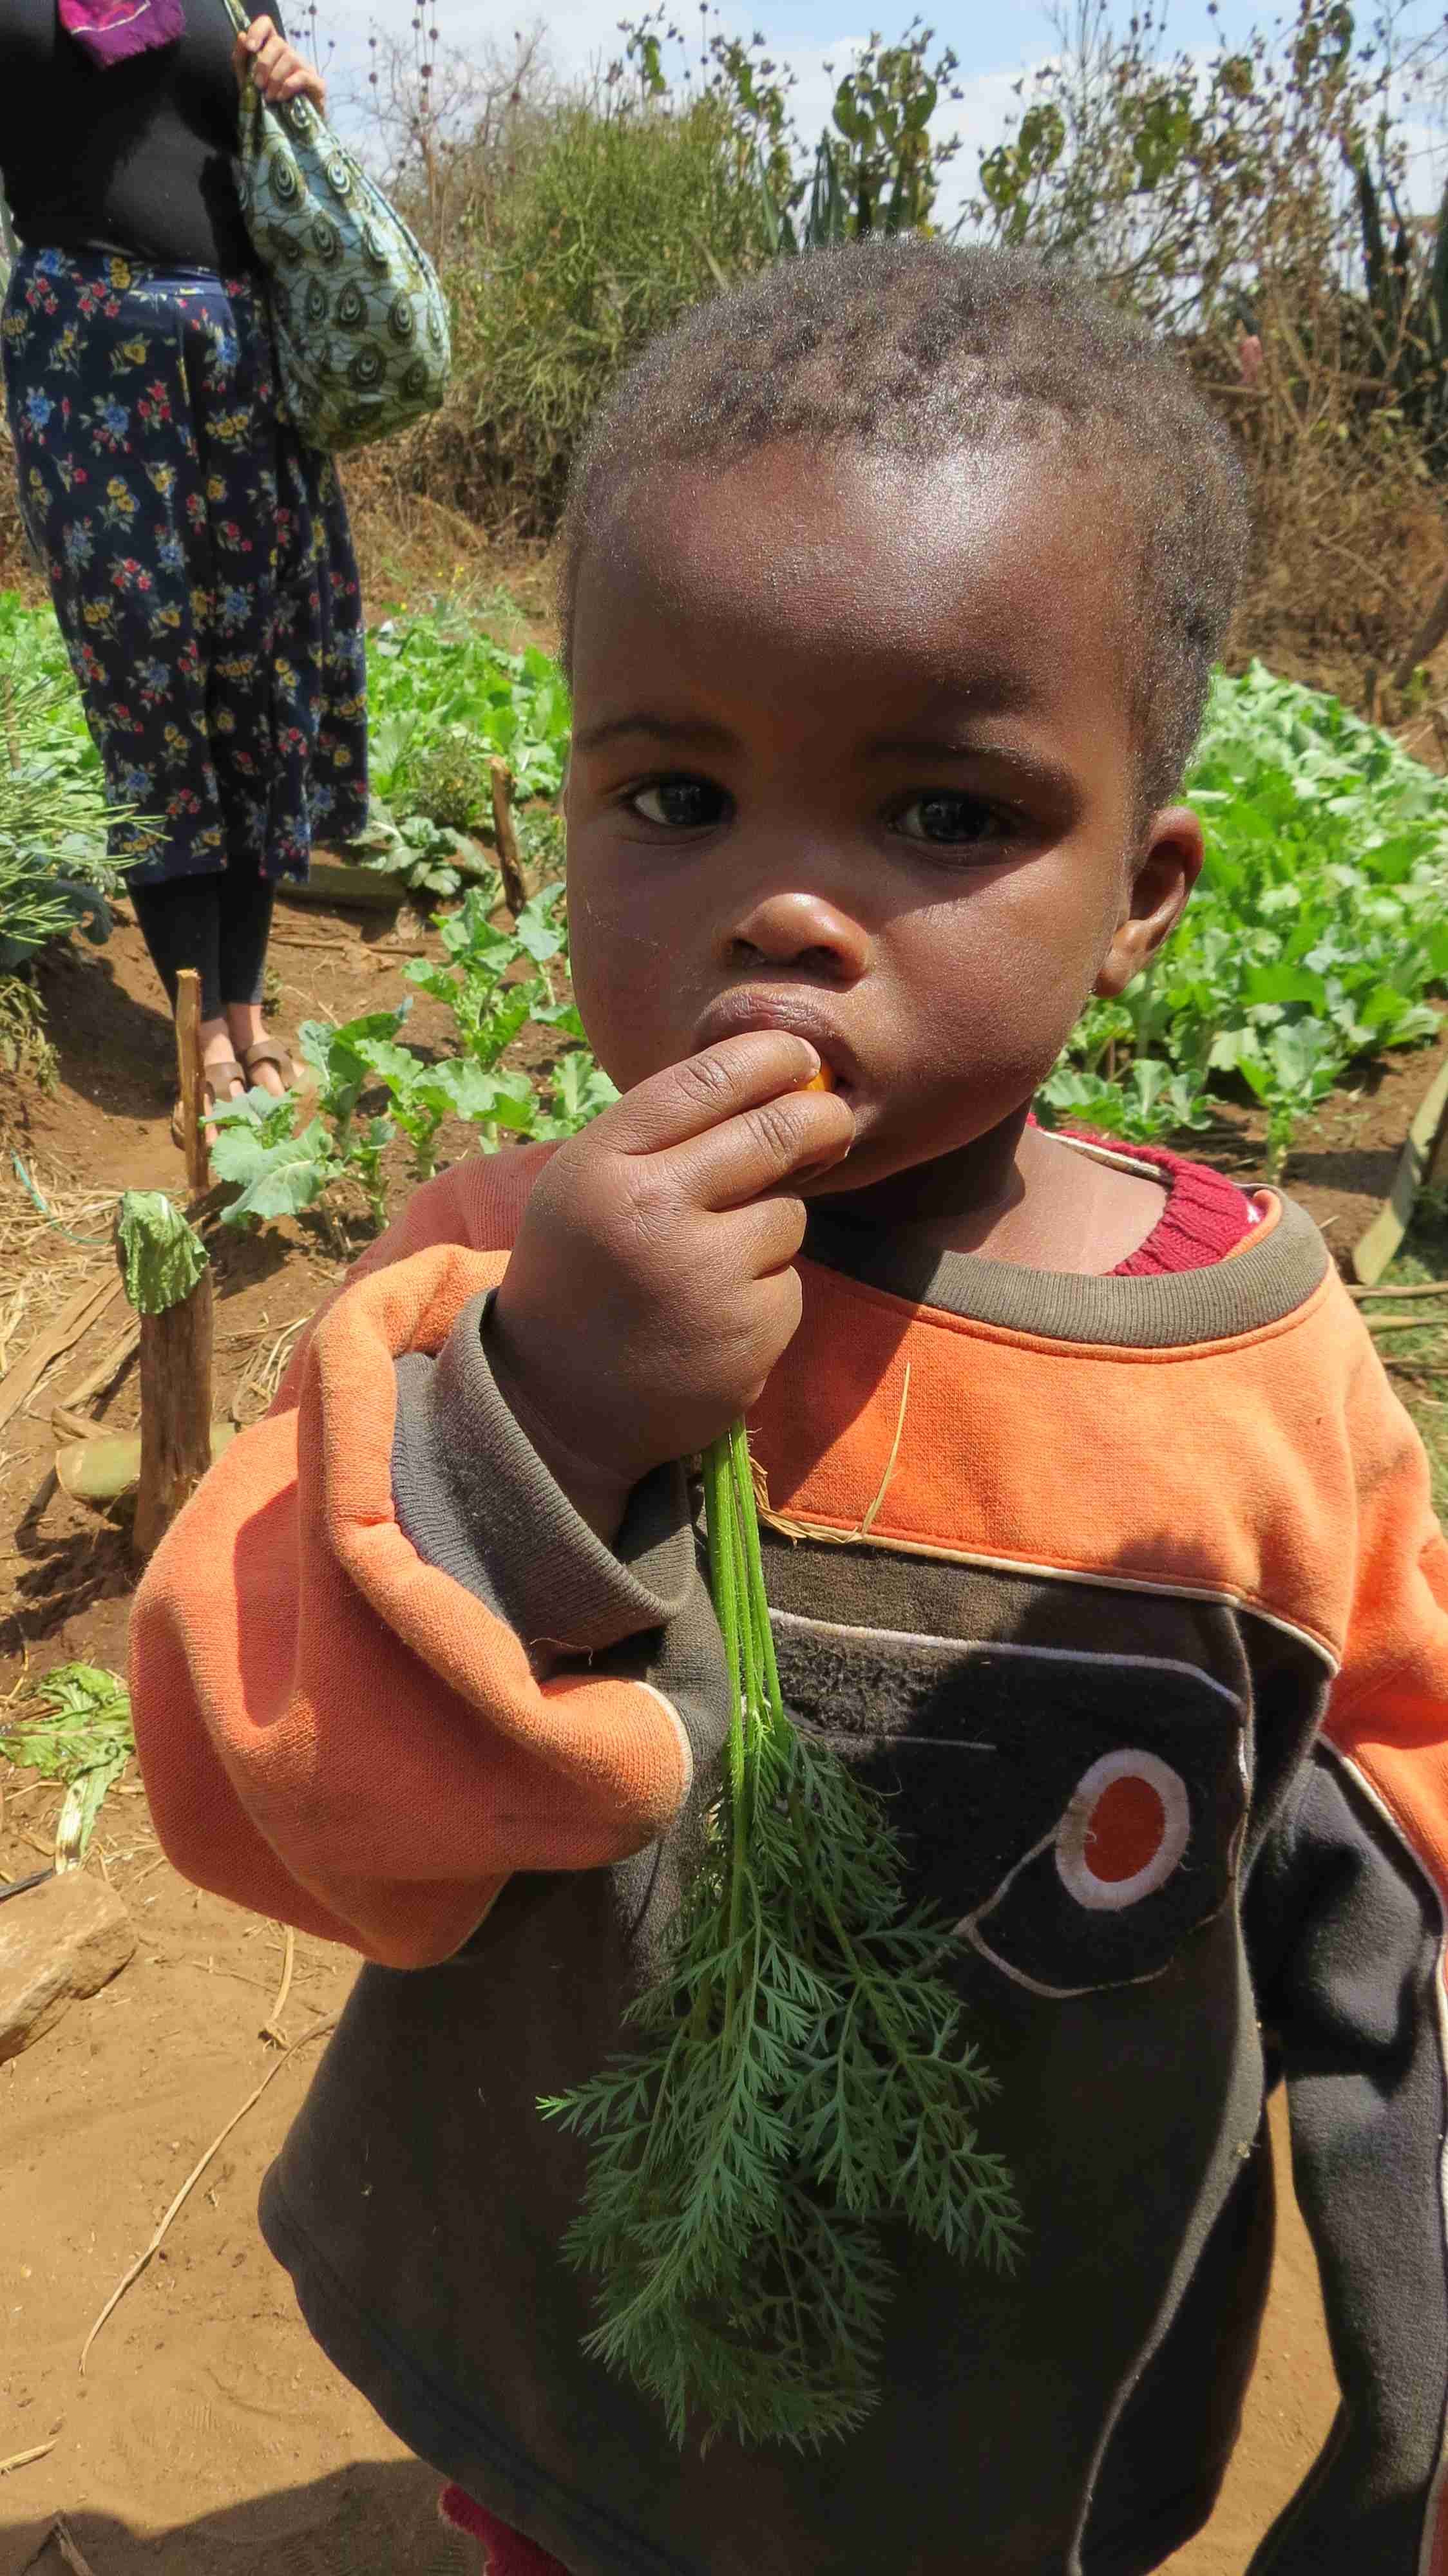 Photo of young boy eating a carrot.